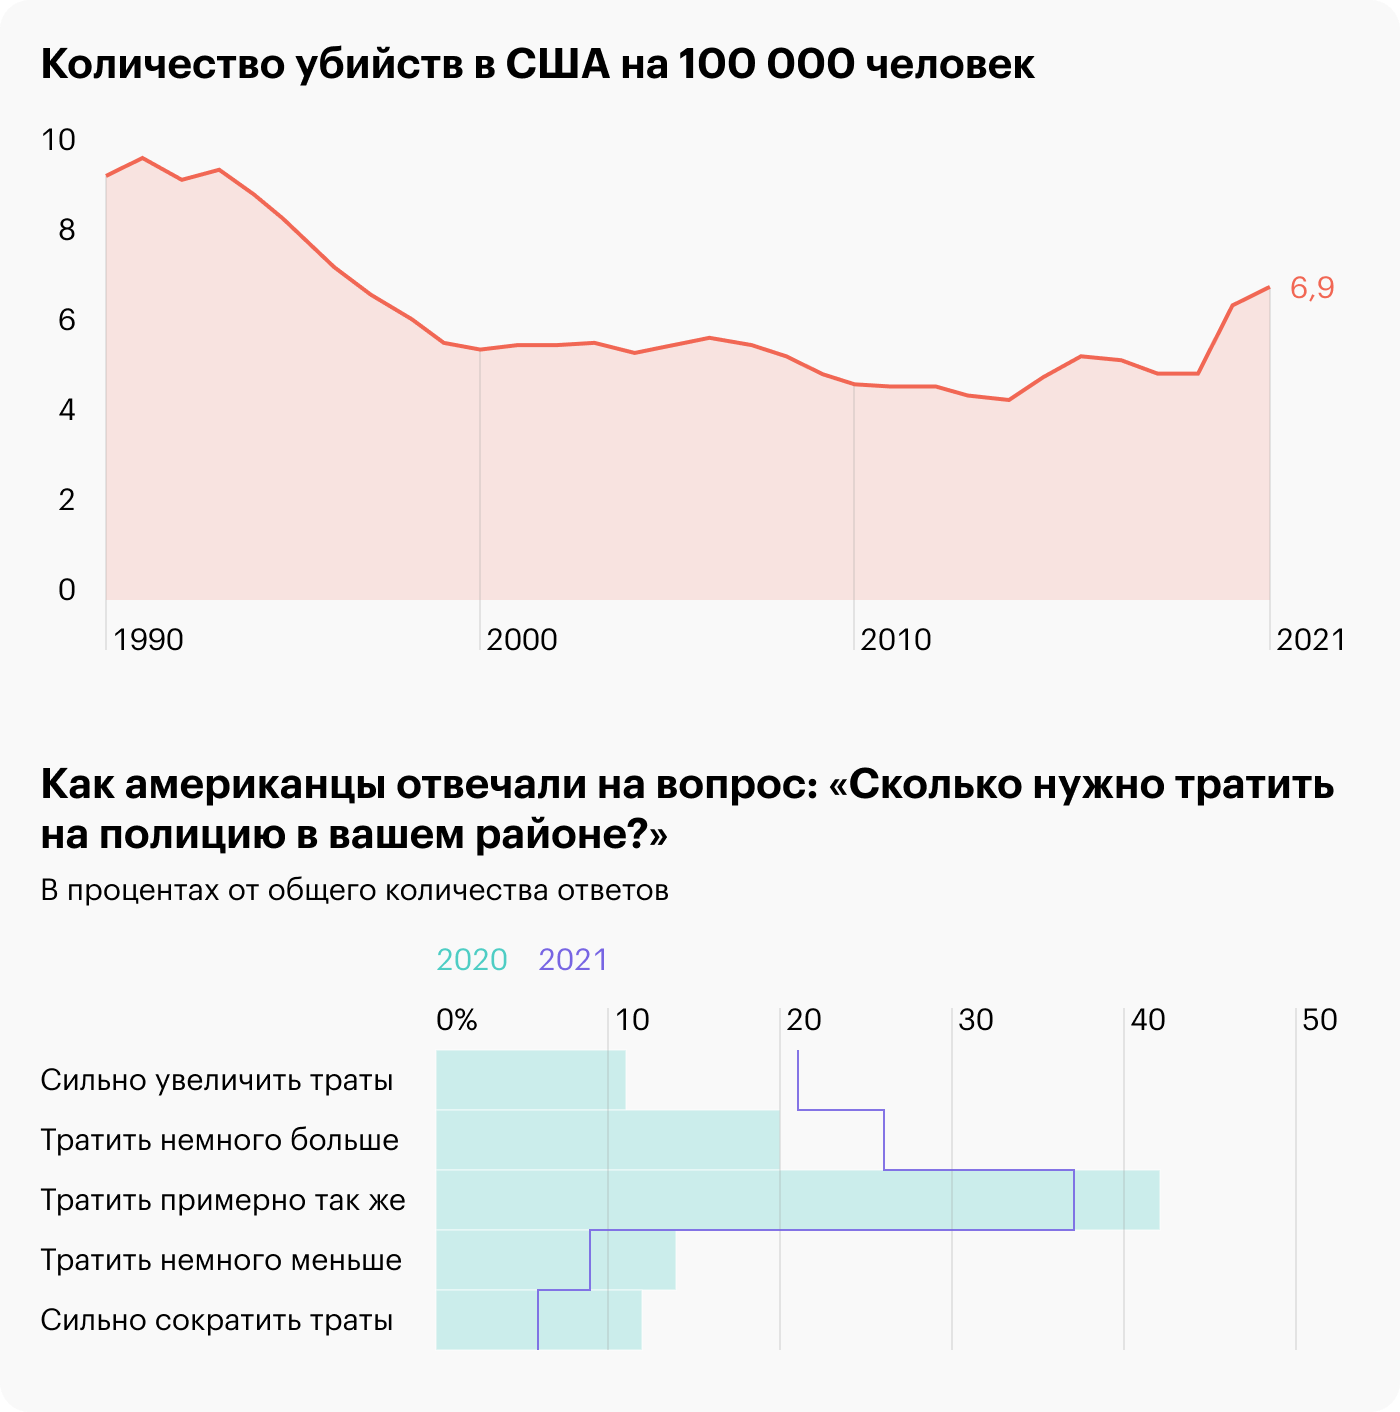 Источник: Daily Shot, The US murder rate, Pew Research Center